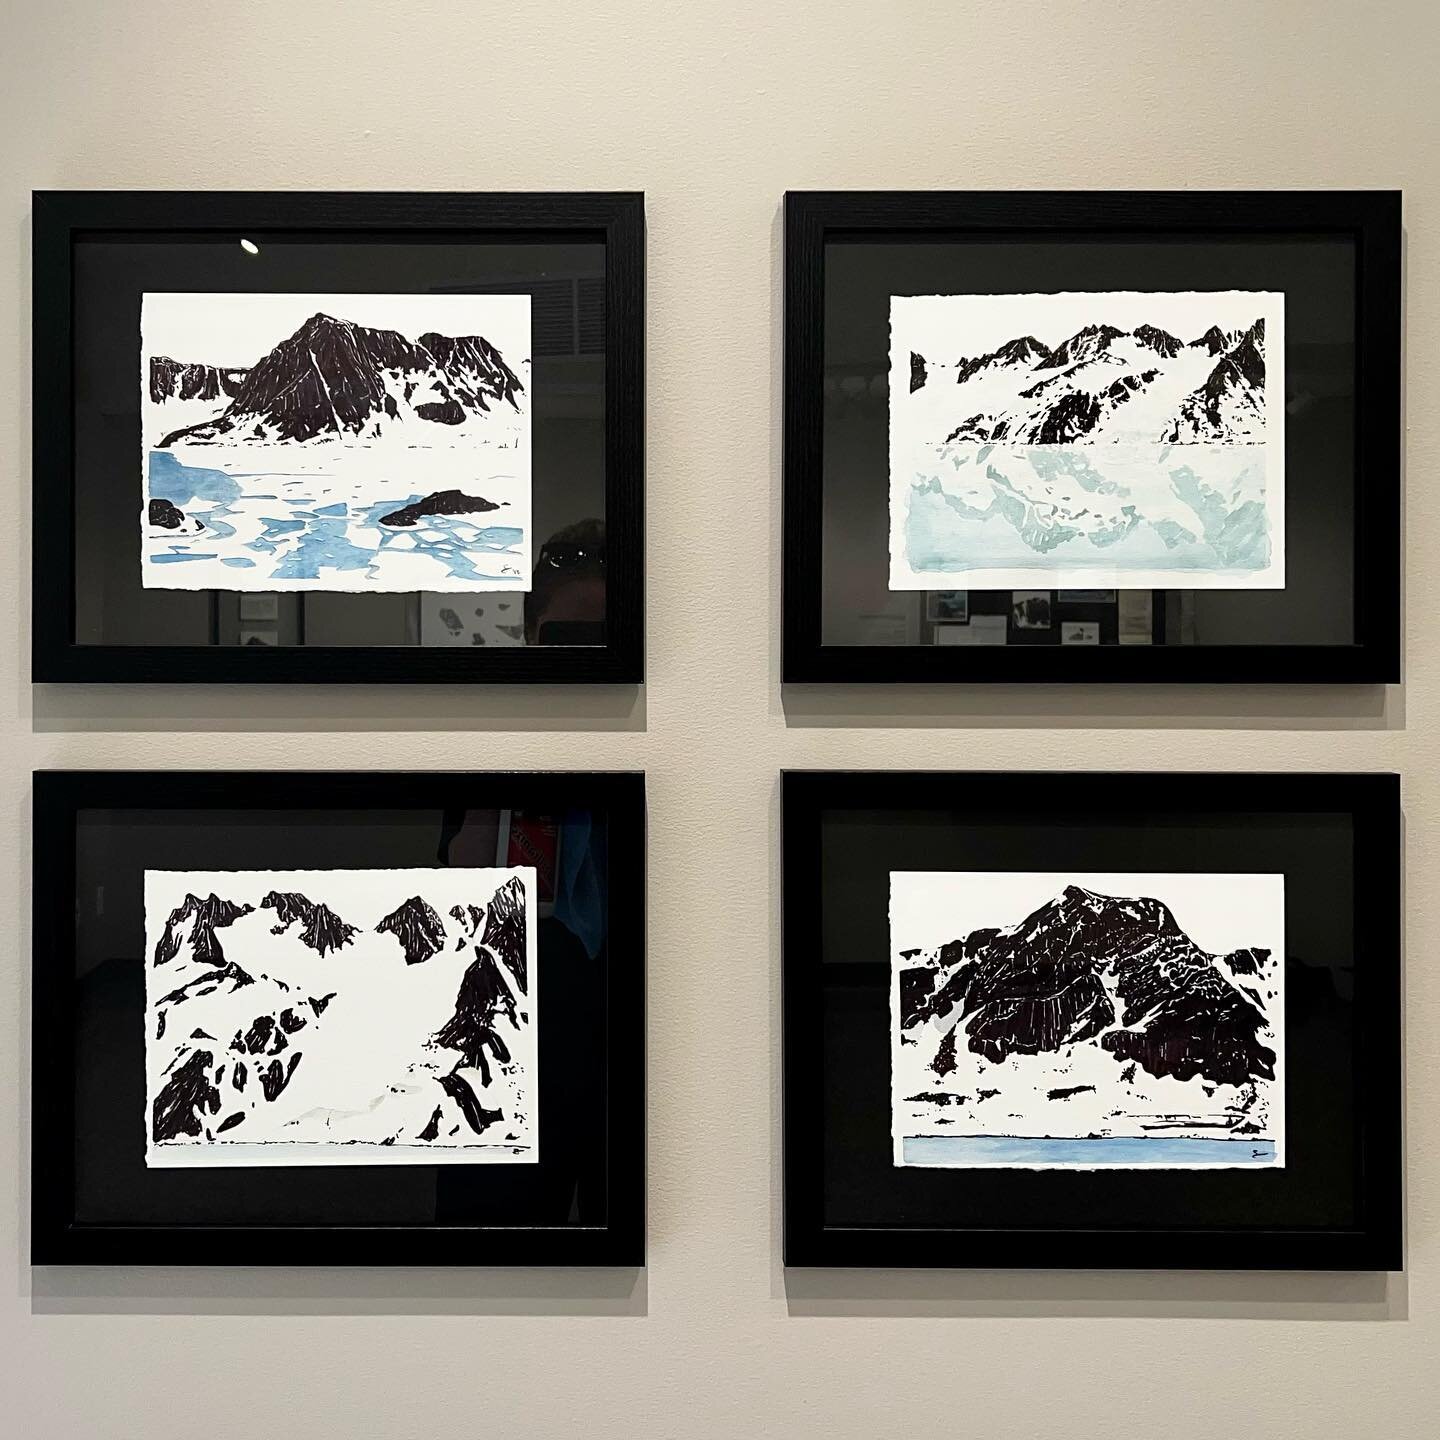 TOMORROW! Register now for the Virtual Artist Talk on Oct. 13th. Registration link in our profile. 

🧊 CHANGE: an arctic journey 🧊 A visual response to the magnificence and rapid change in the earth&rsquo;s Northern Polar Region 🧊 Exhibition/artwo